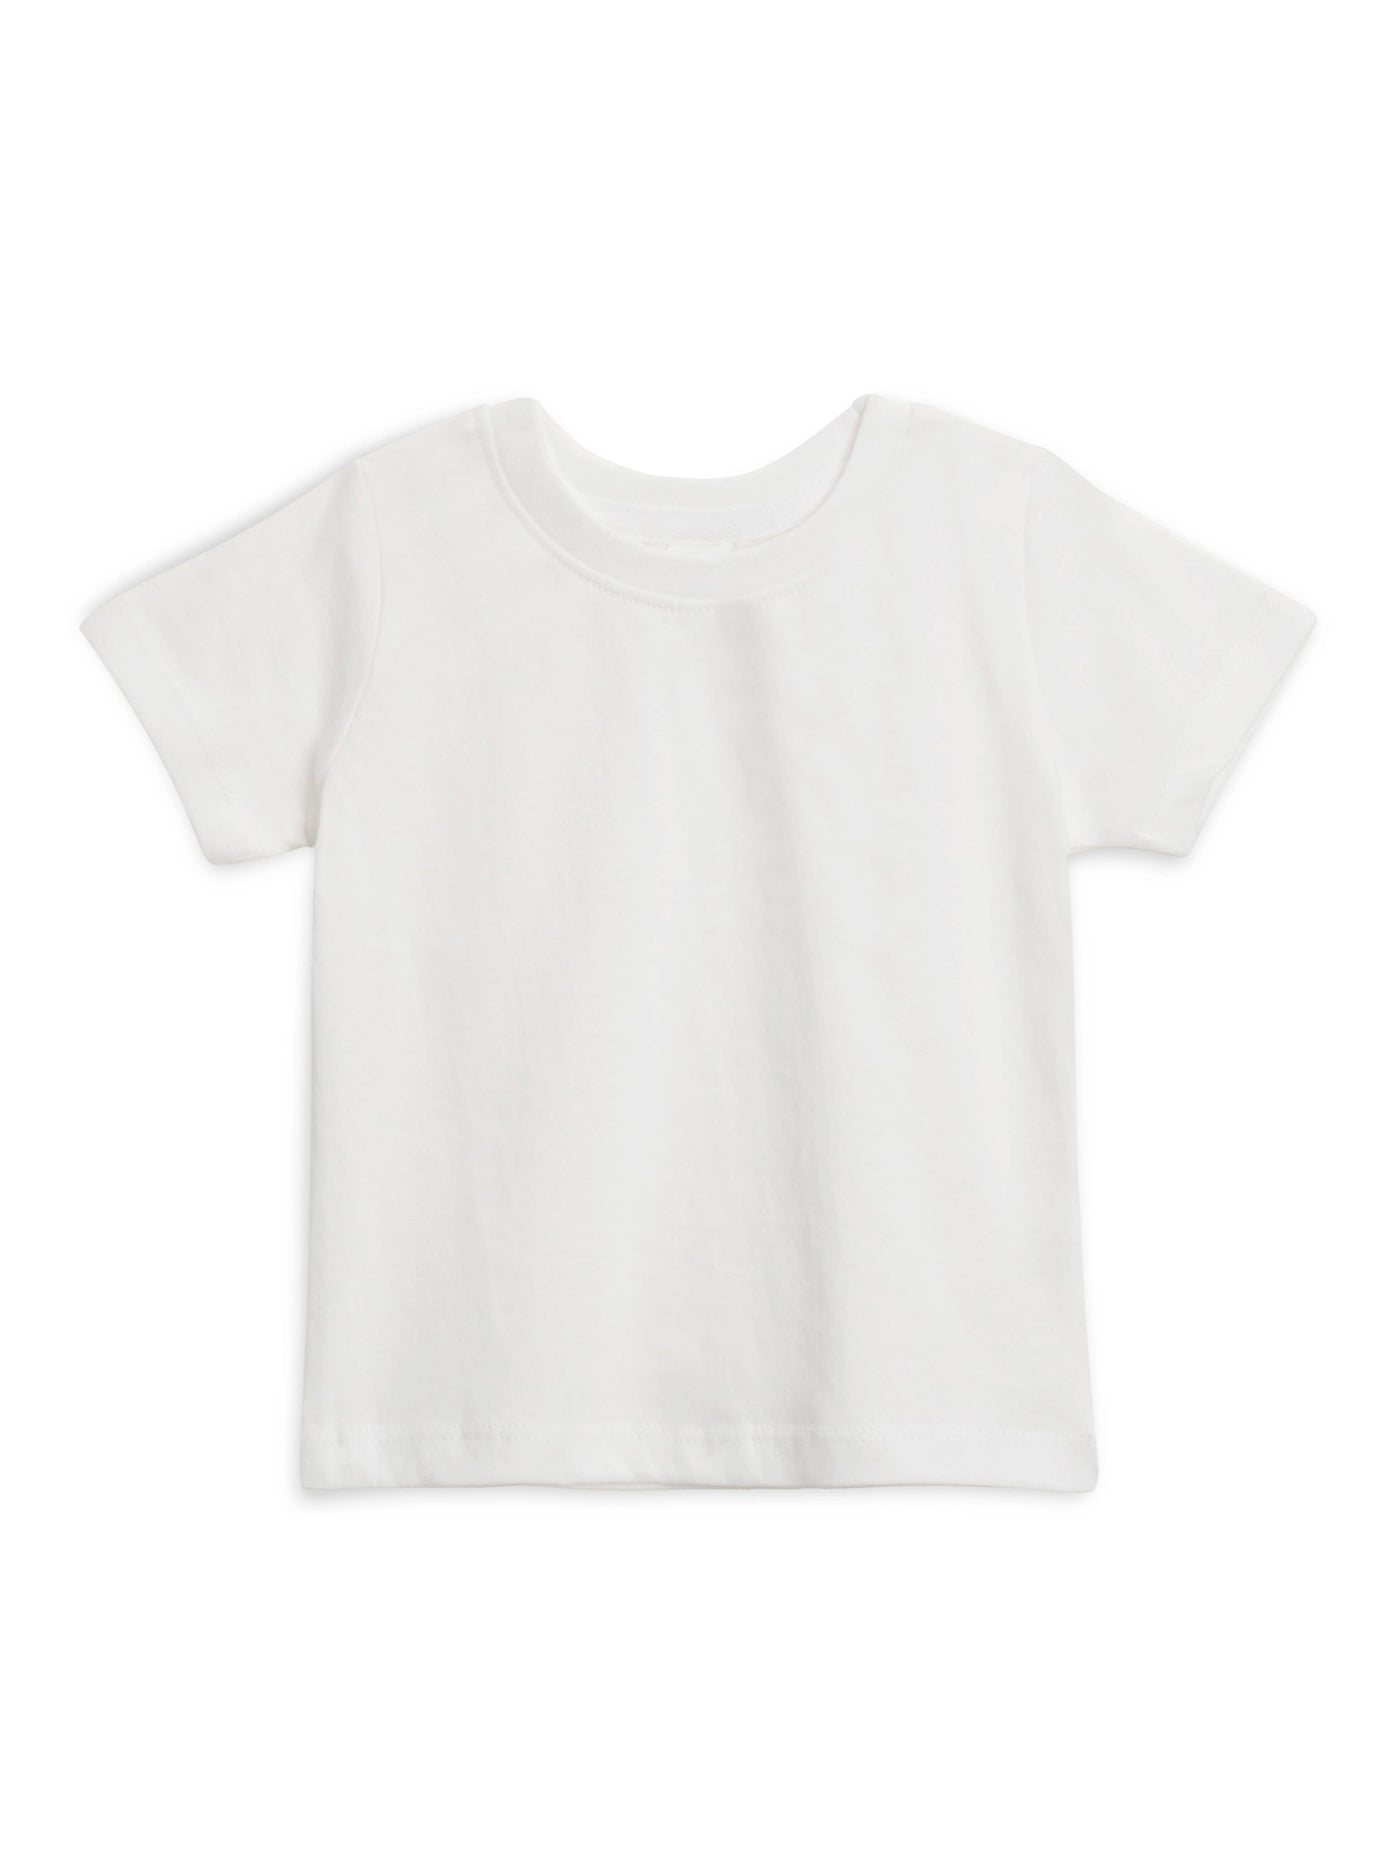 Organic Kids Classic Crew Neck Tee in White and Natural